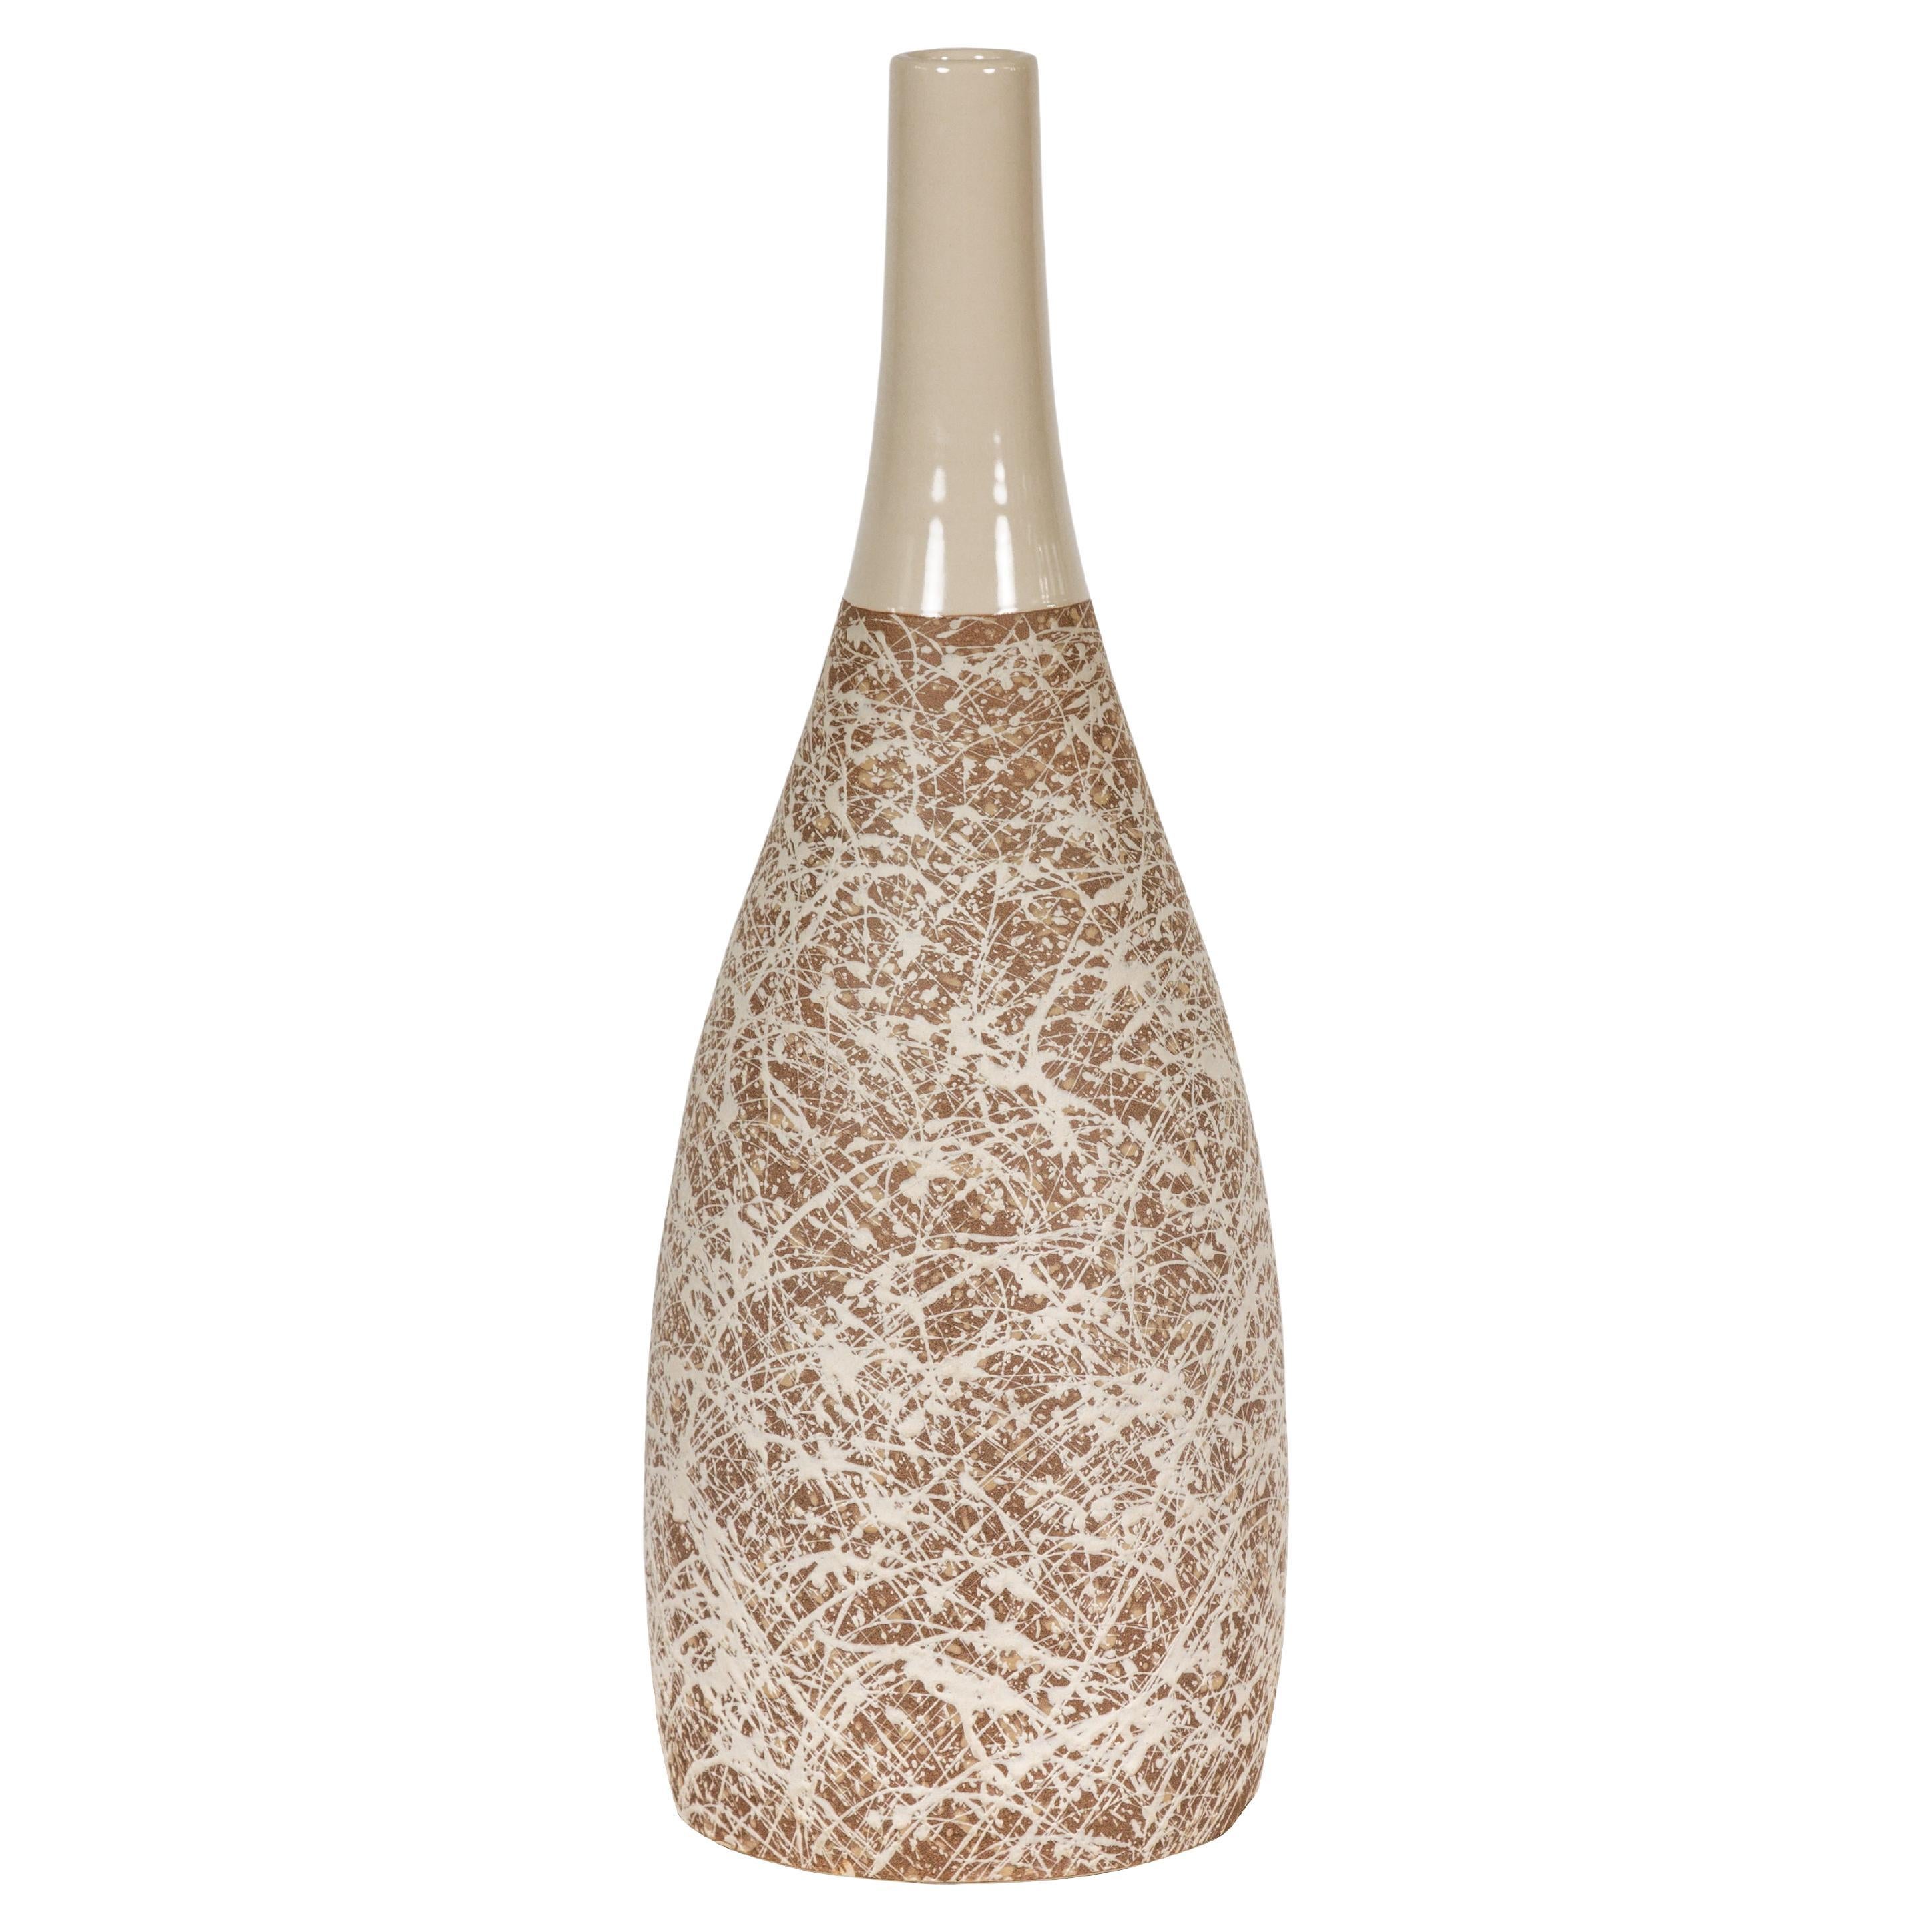 Hand-Crafted Artisan Bottle Shaped Brown and Cream Ceramic Vase with Dripping For Sale